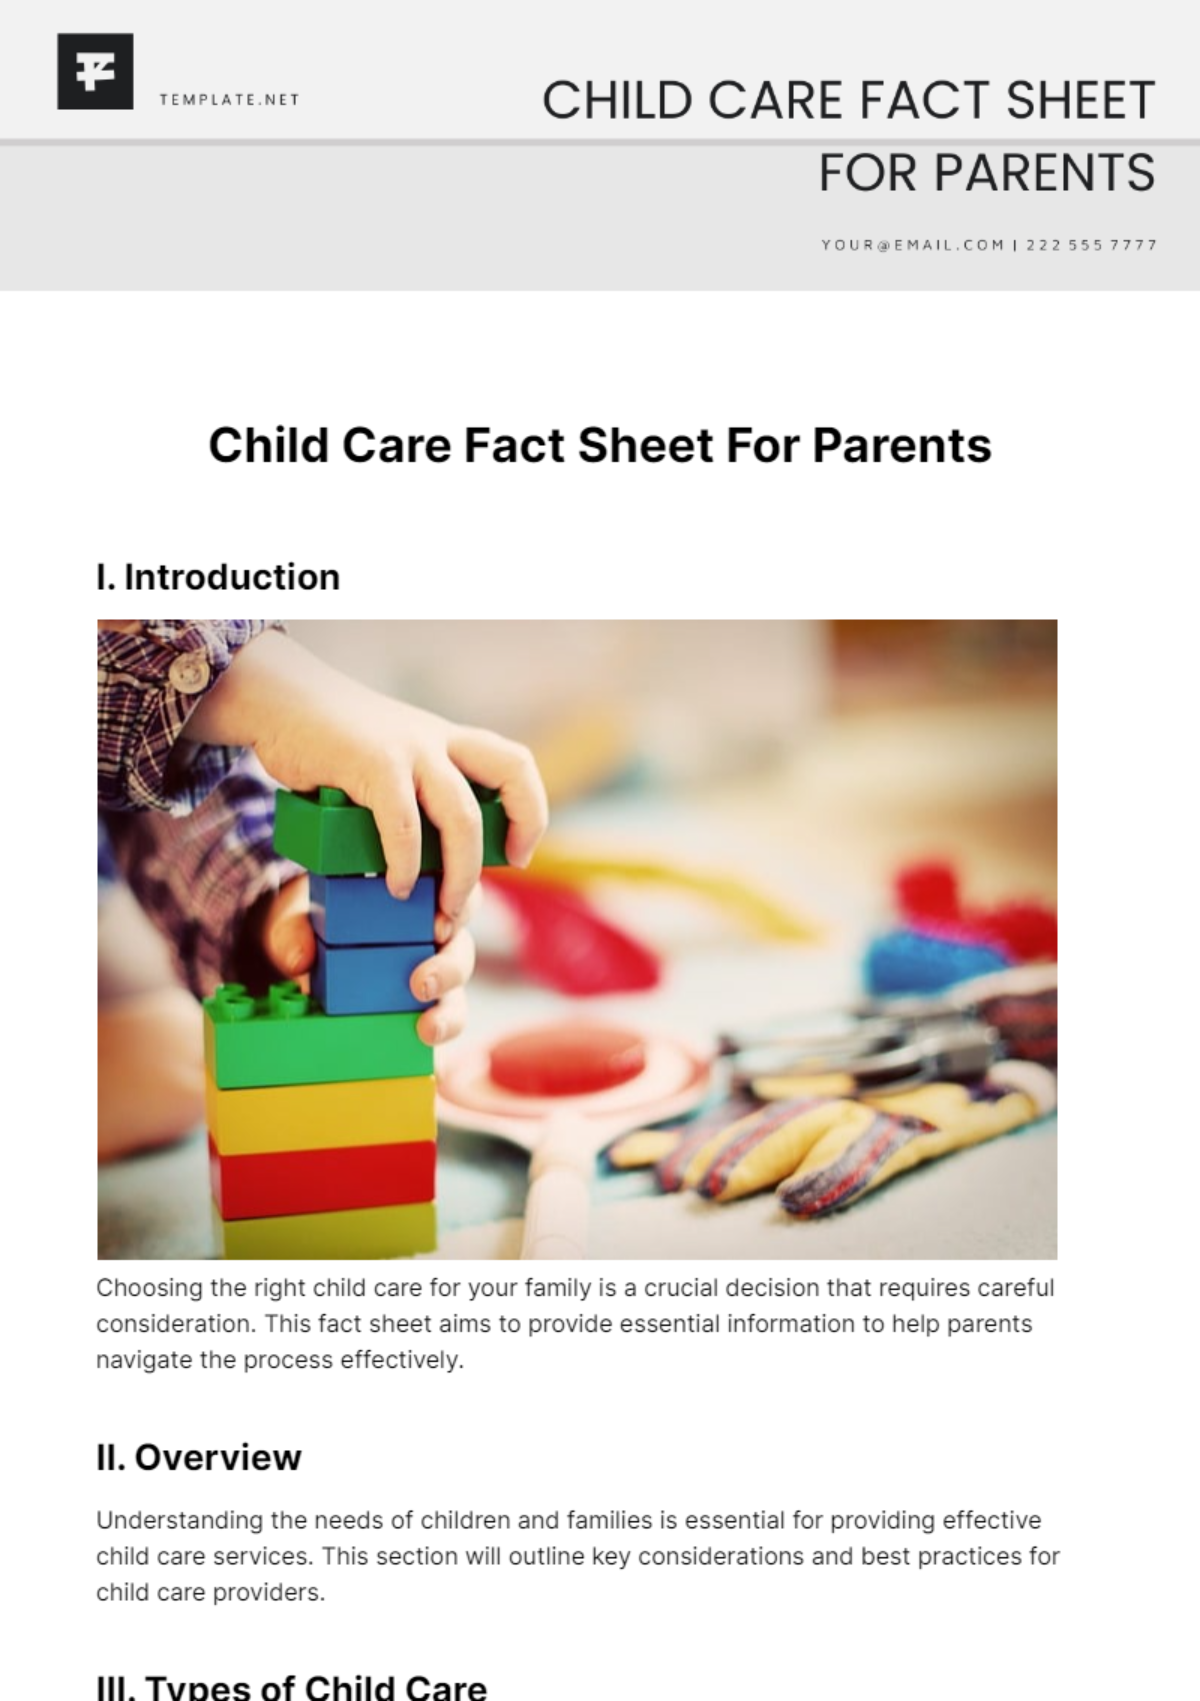 Child Care Fact Sheet For Parents Template